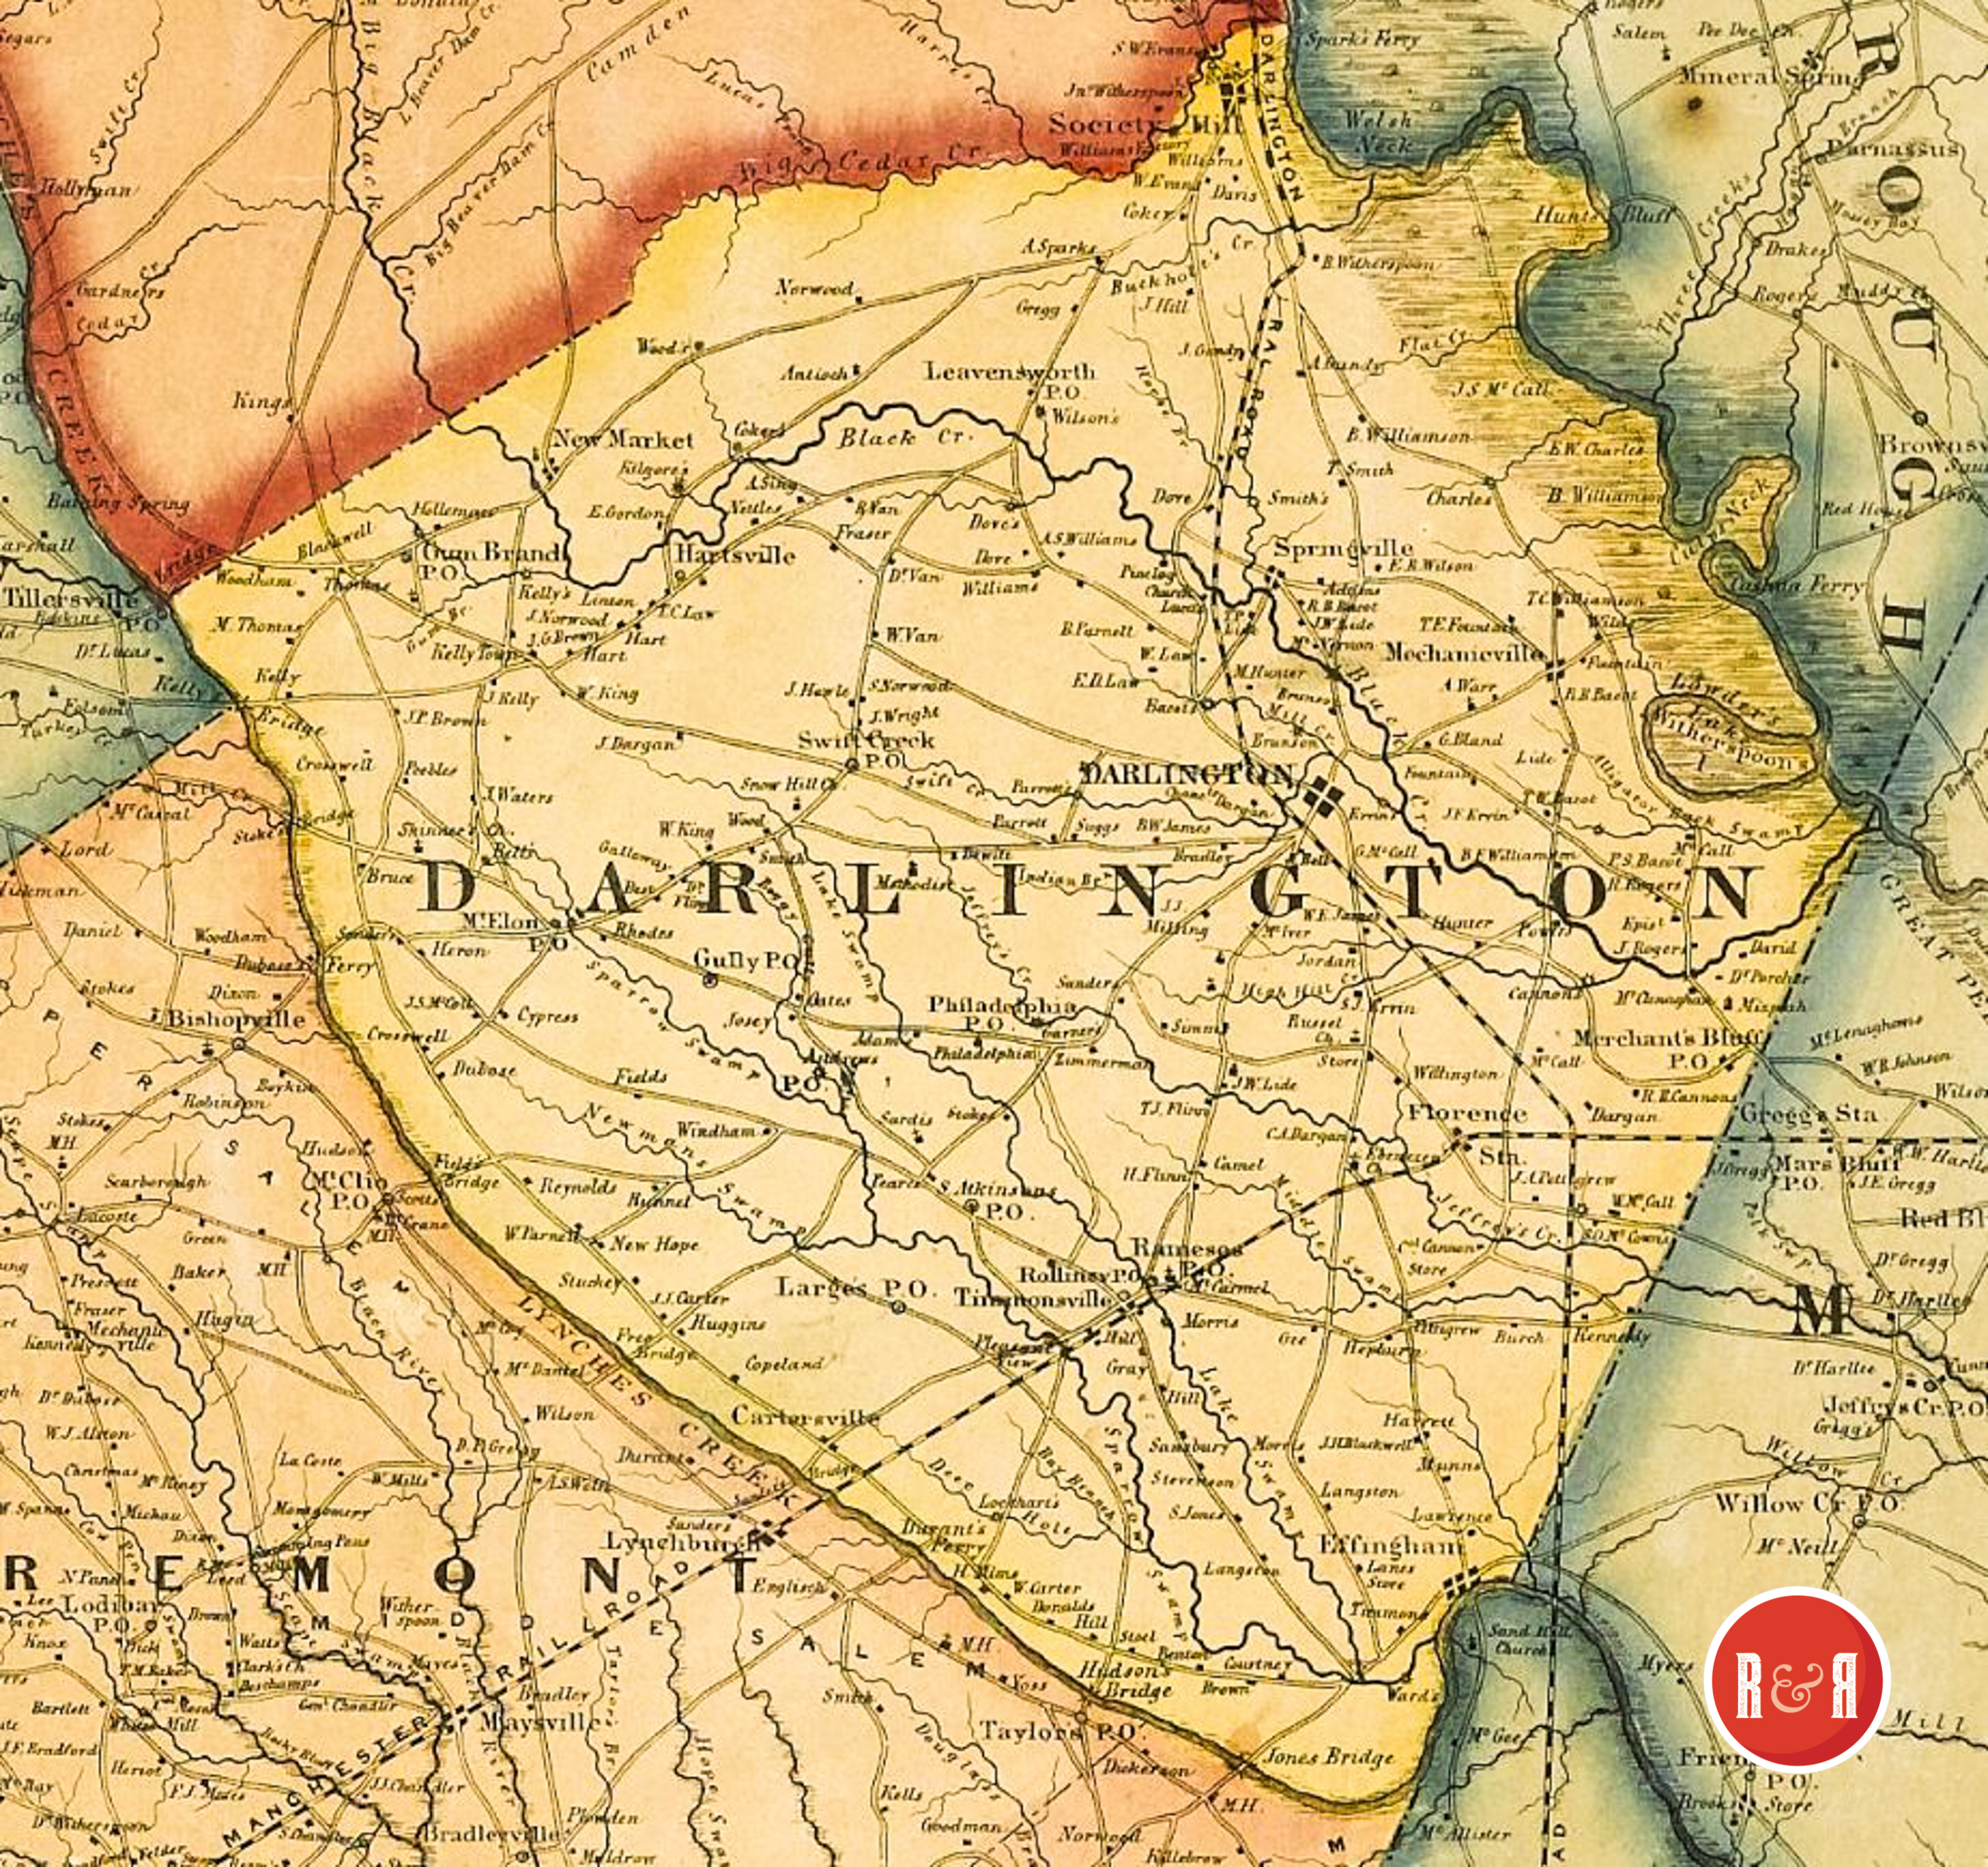 COLTON'S 1854 MAP OF DARLINGTON COUNTY - ENLARGED